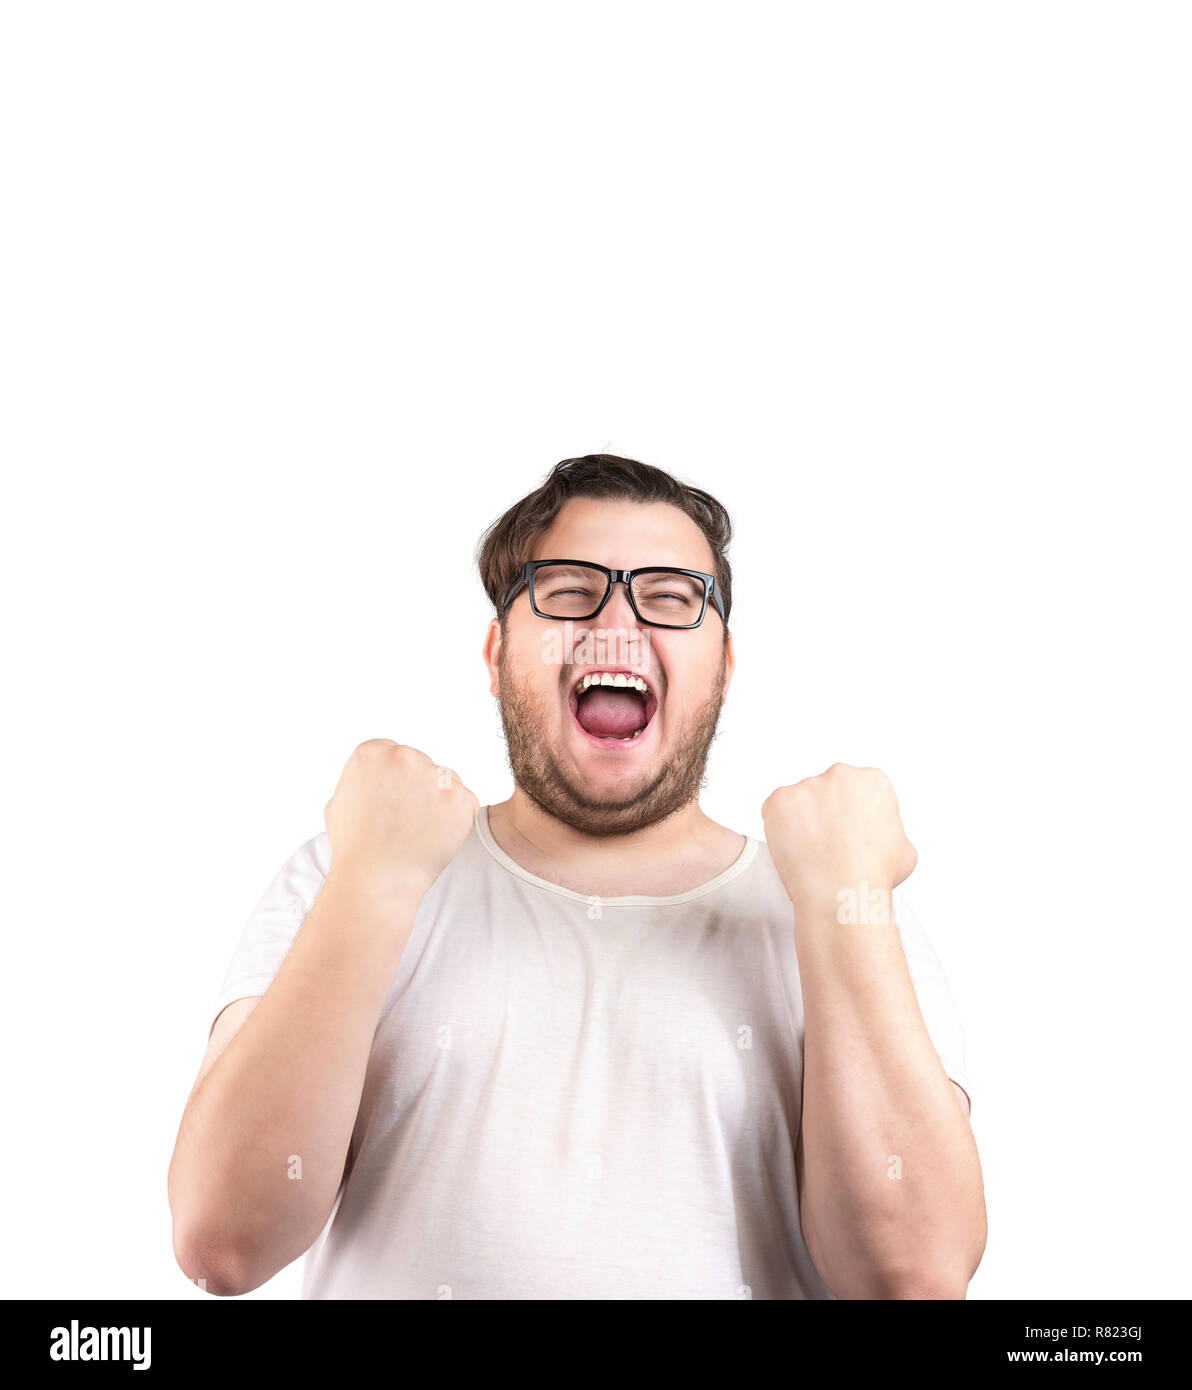 Obese man in glasses holding fists in excitement of victory while screaming isolated on white background Stock Photo